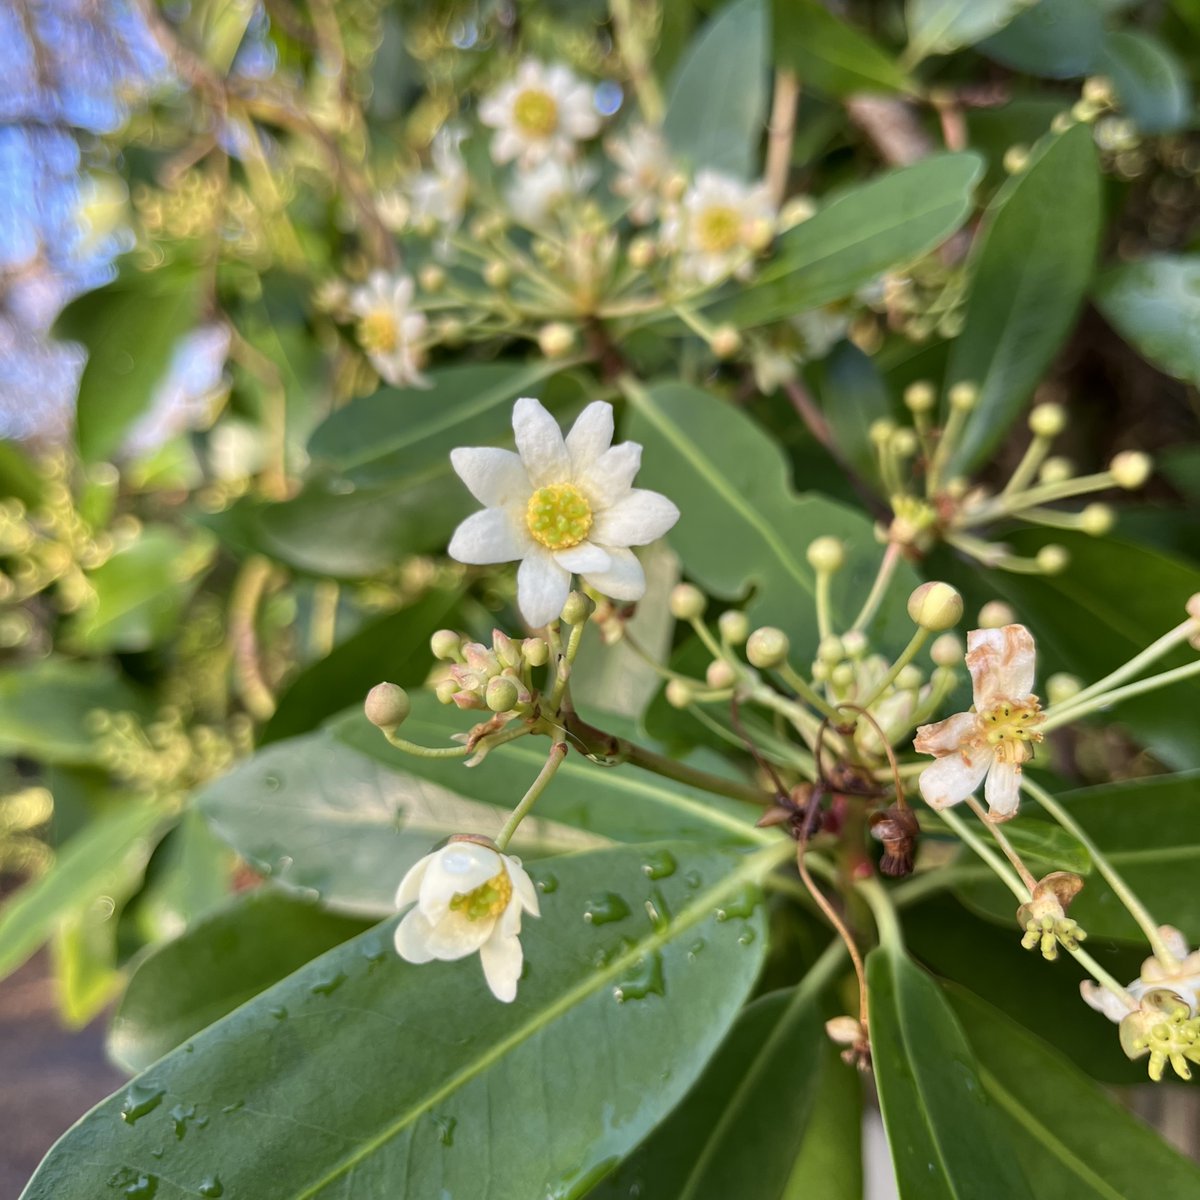 Drimys winter is an evergreen shrub originating from the rainforests of Chile and Argentina, with creamy white flowers and pink and green buds. With fragrant red bark and scented flowers, it can be found near the compost yard at the bottom of the Garden. #plants #botanicgarden